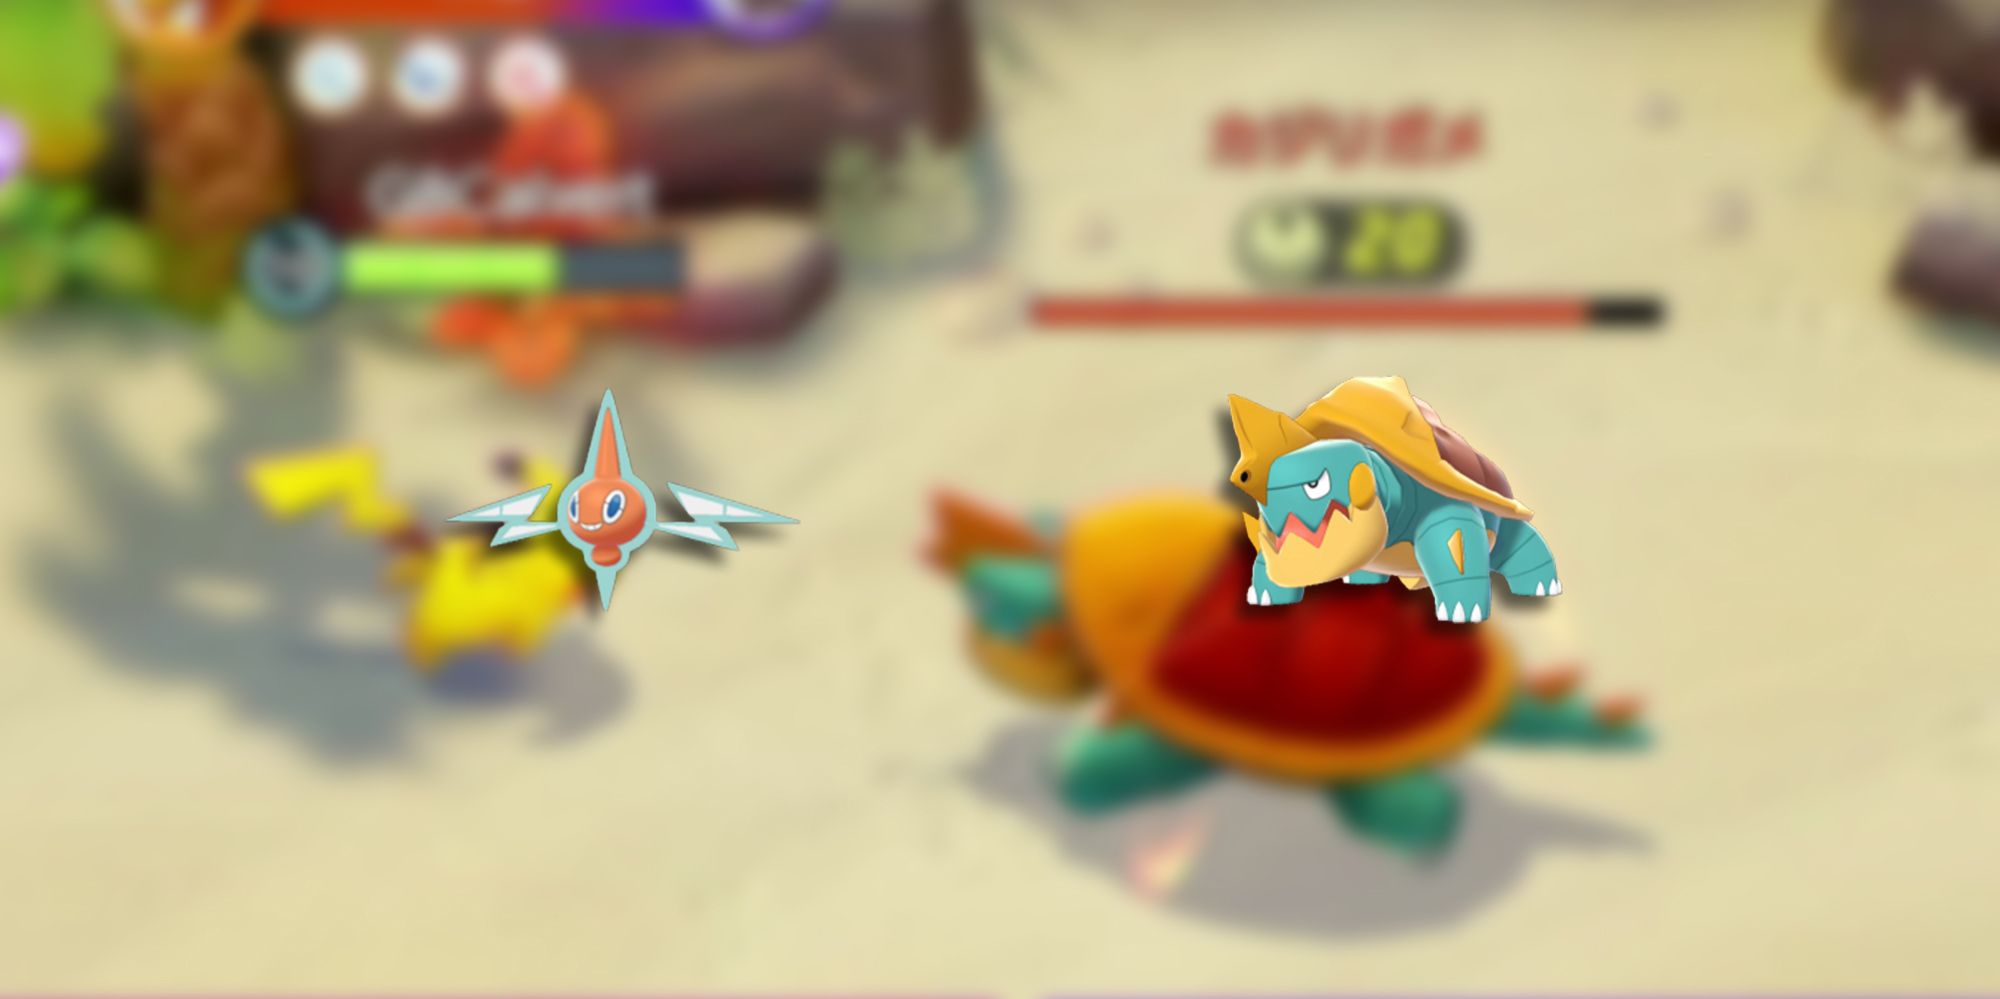 Pokemon Unite - PNGs of Rotom and Dreadnaw Overlaid On Blurred Image Of Pikachu Fighting Drednaw In-Game